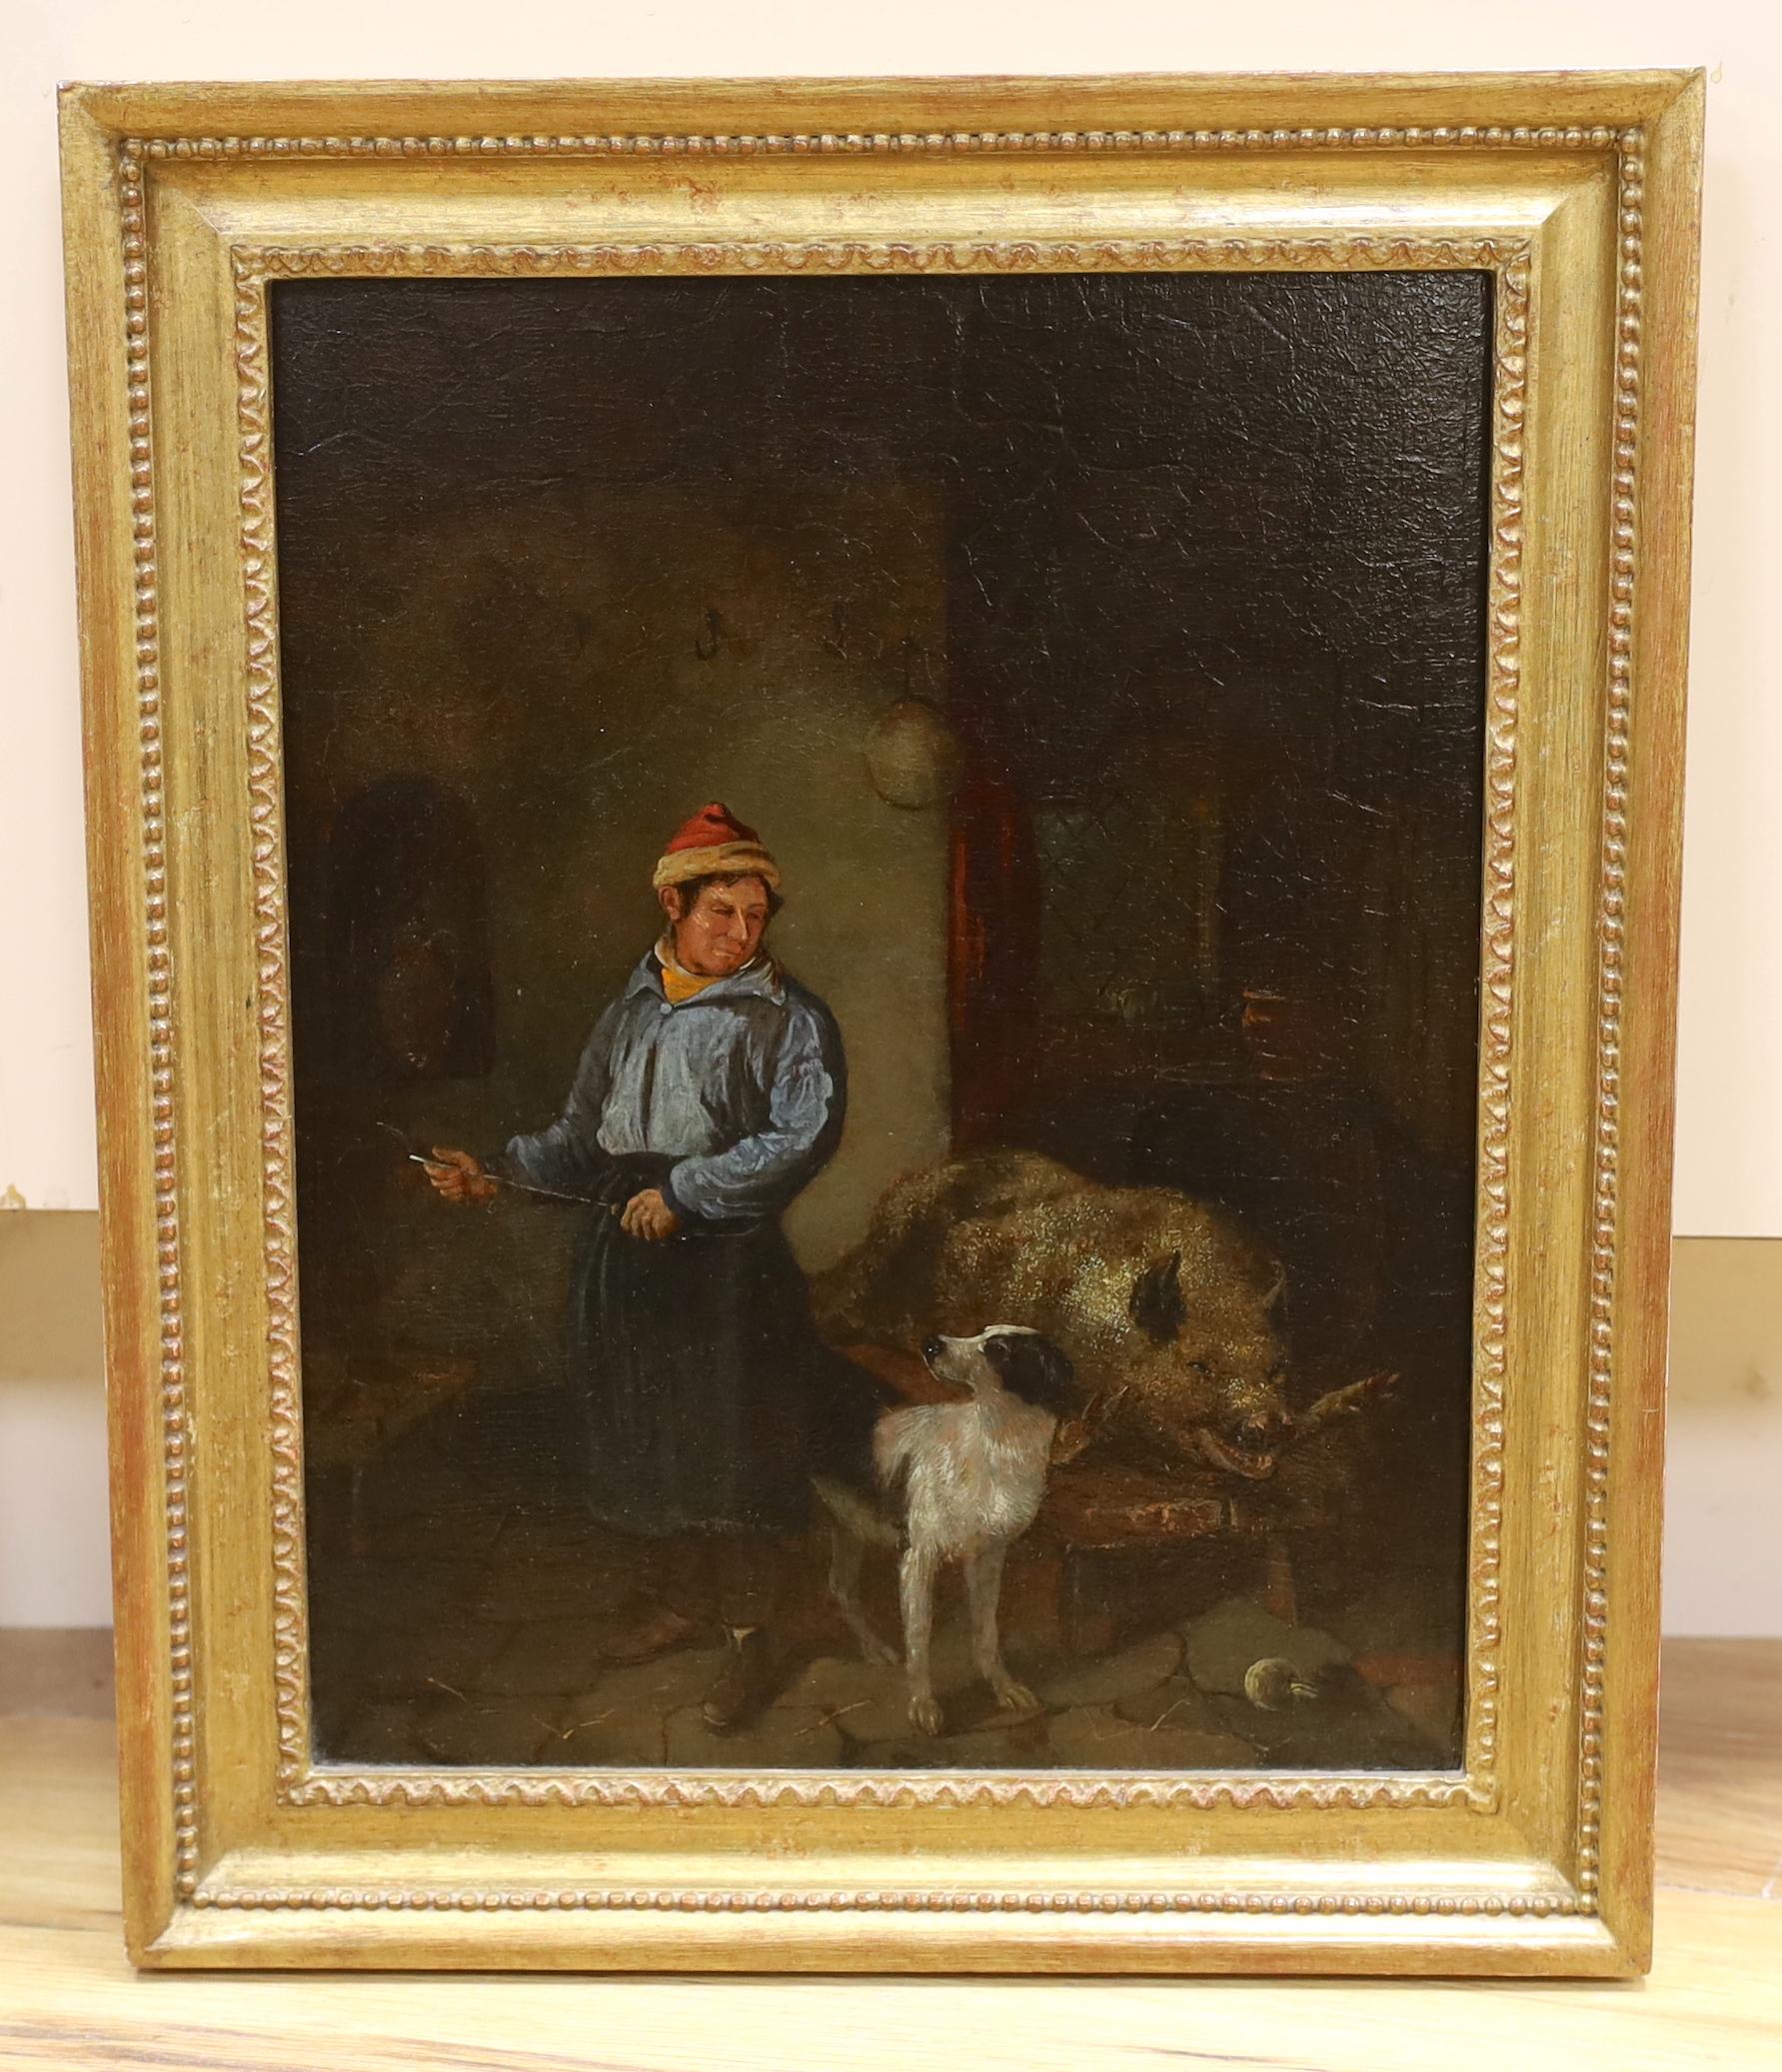 After George Morland (1763-1804), oil on oak panel, Interior with a figure preparing to butcher a pig, unsigned, 31 x 25cm